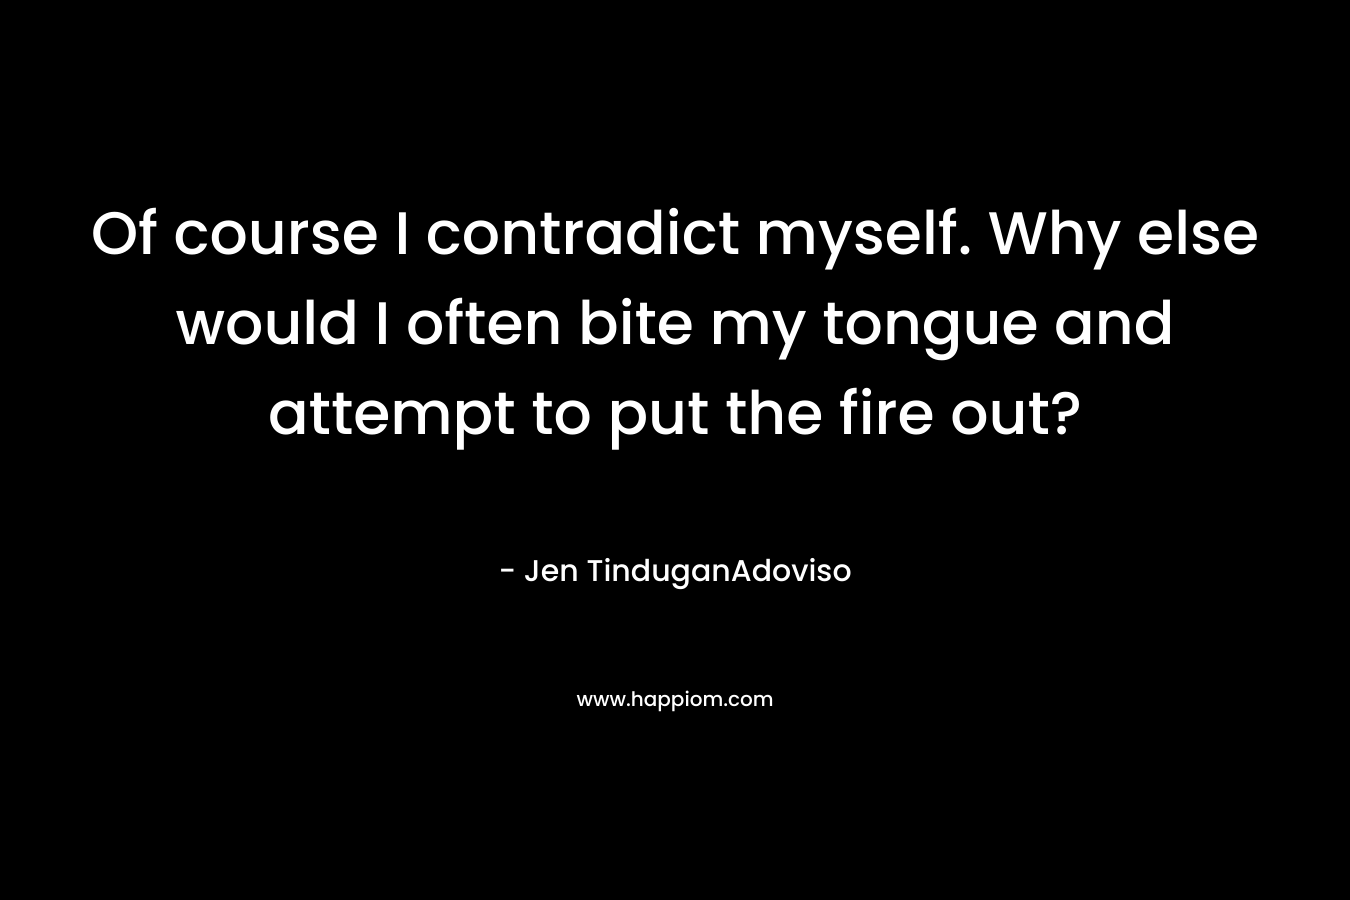 Of course I contradict myself. Why else would I often bite my tongue and attempt to put the fire out? – Jen TinduganAdoviso